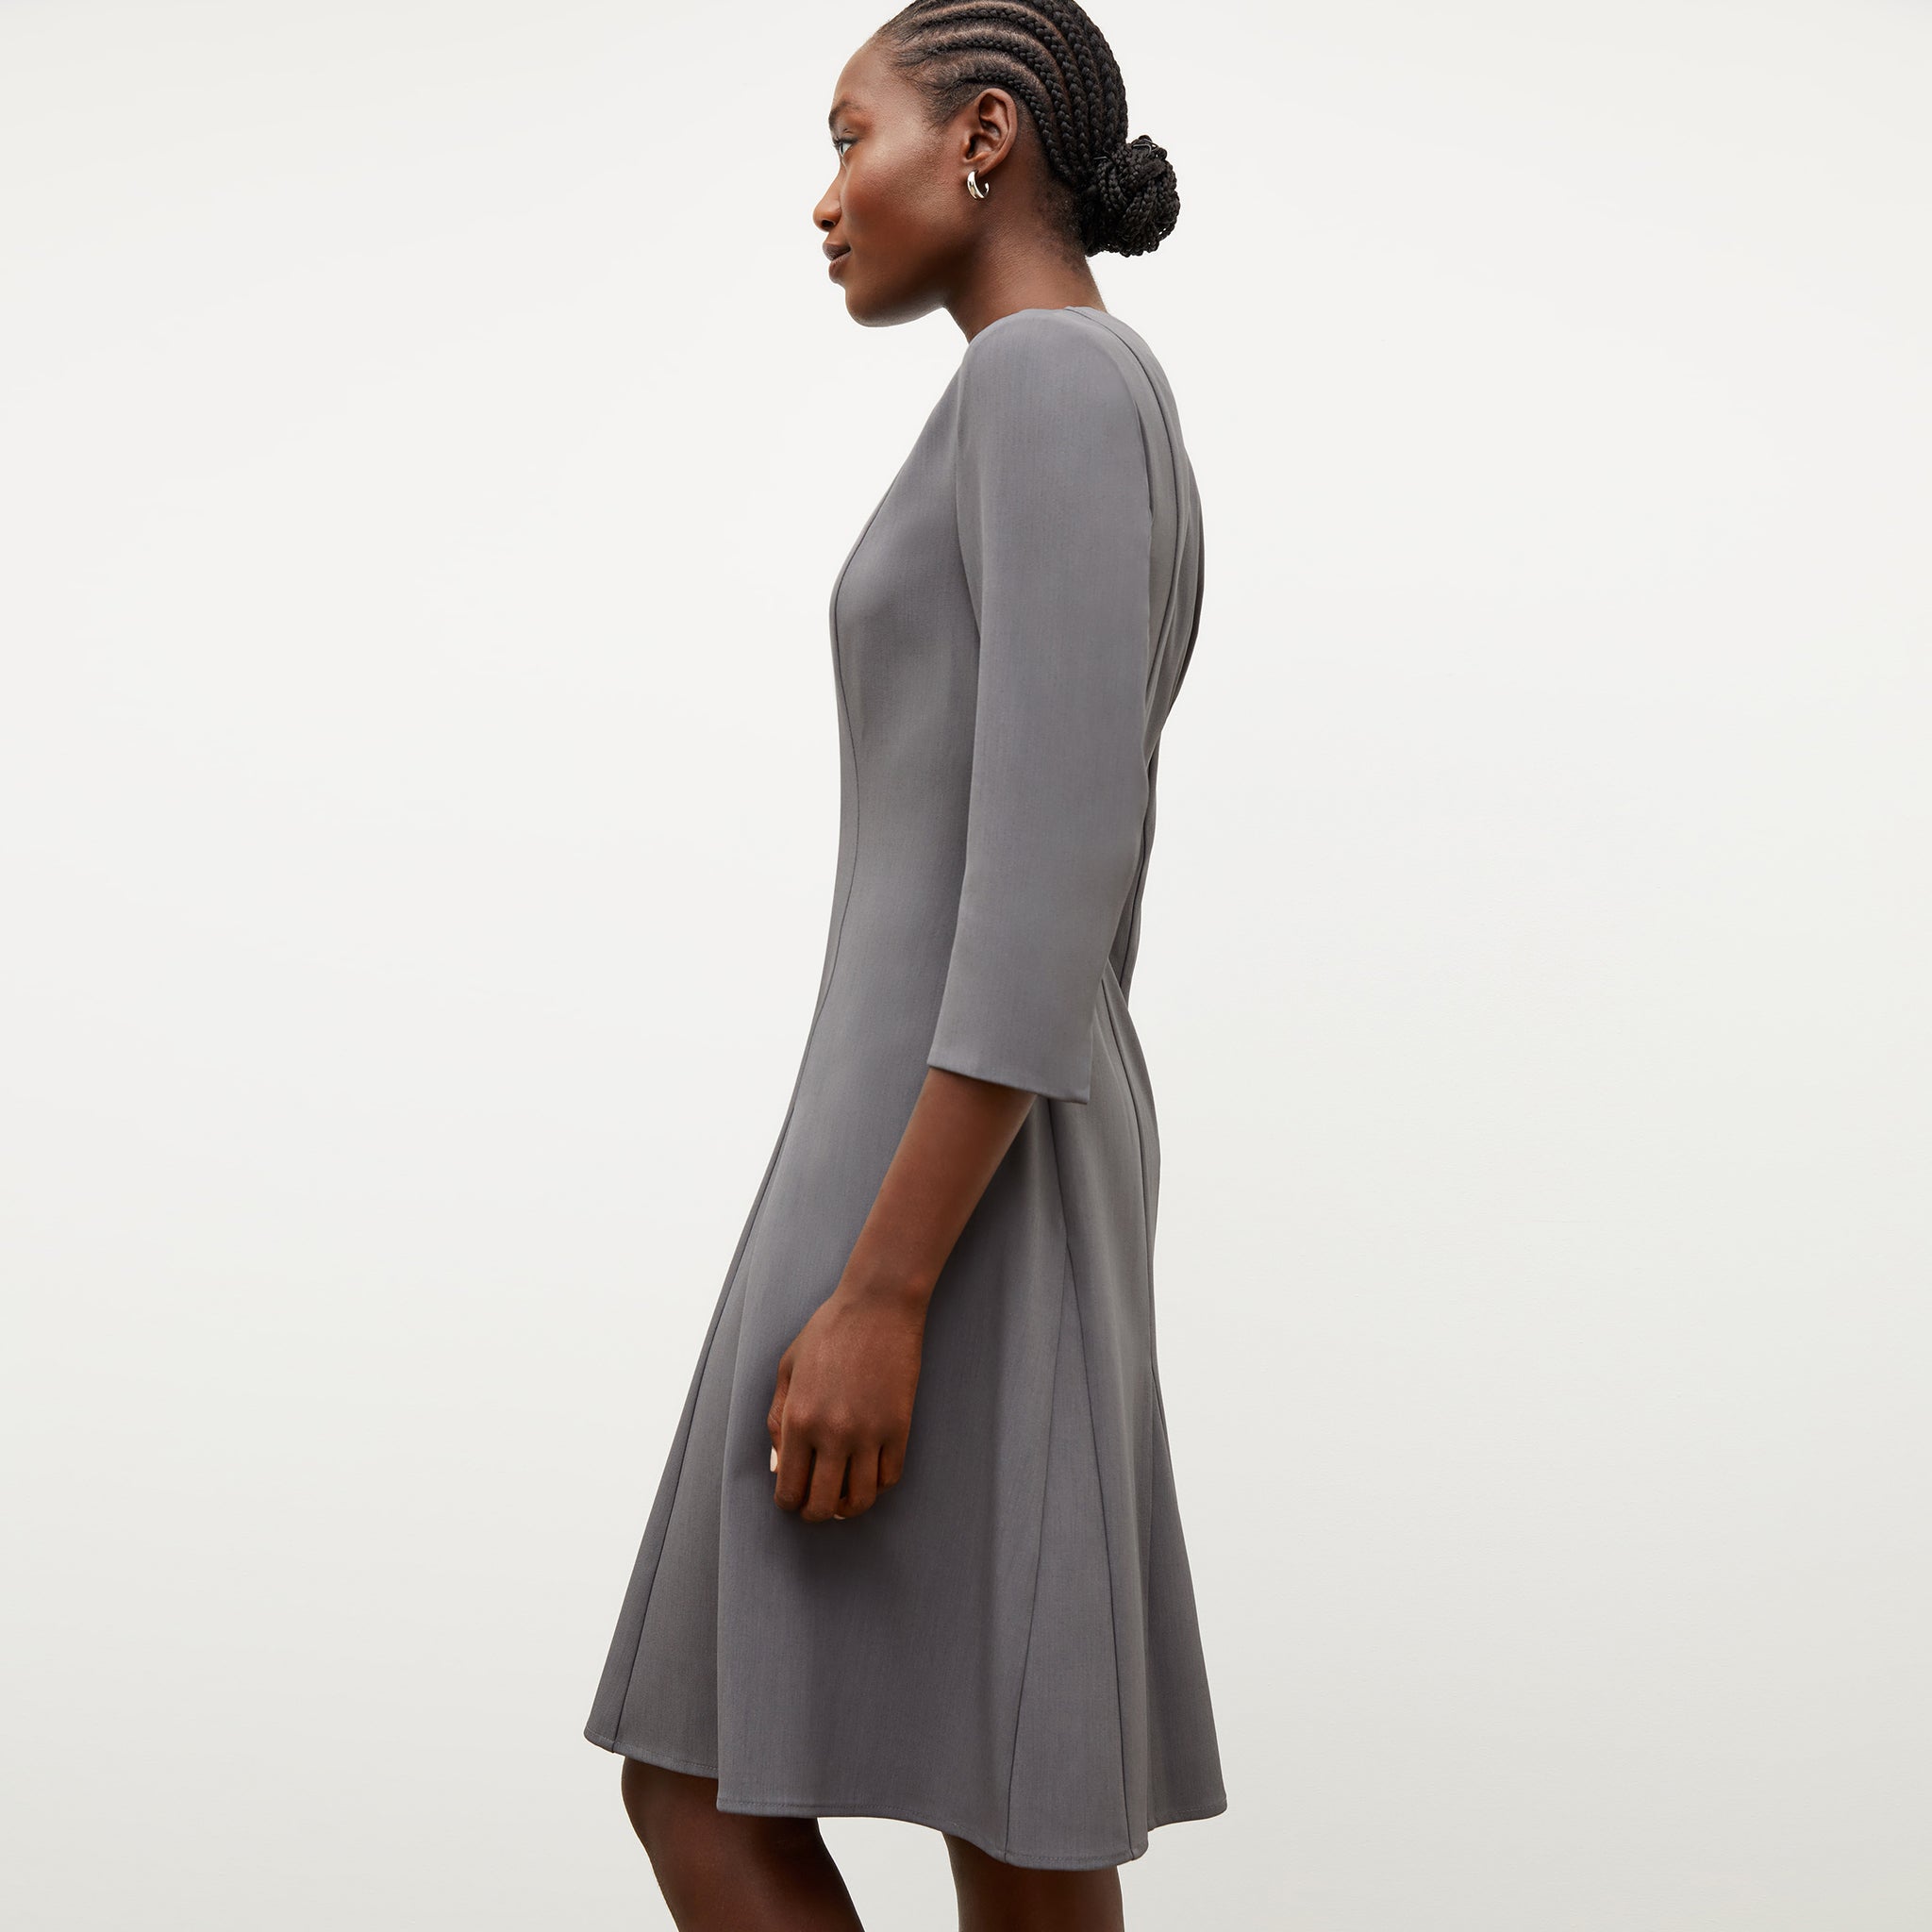 Image of a woman wearing the Erica Dress in Steel Gray